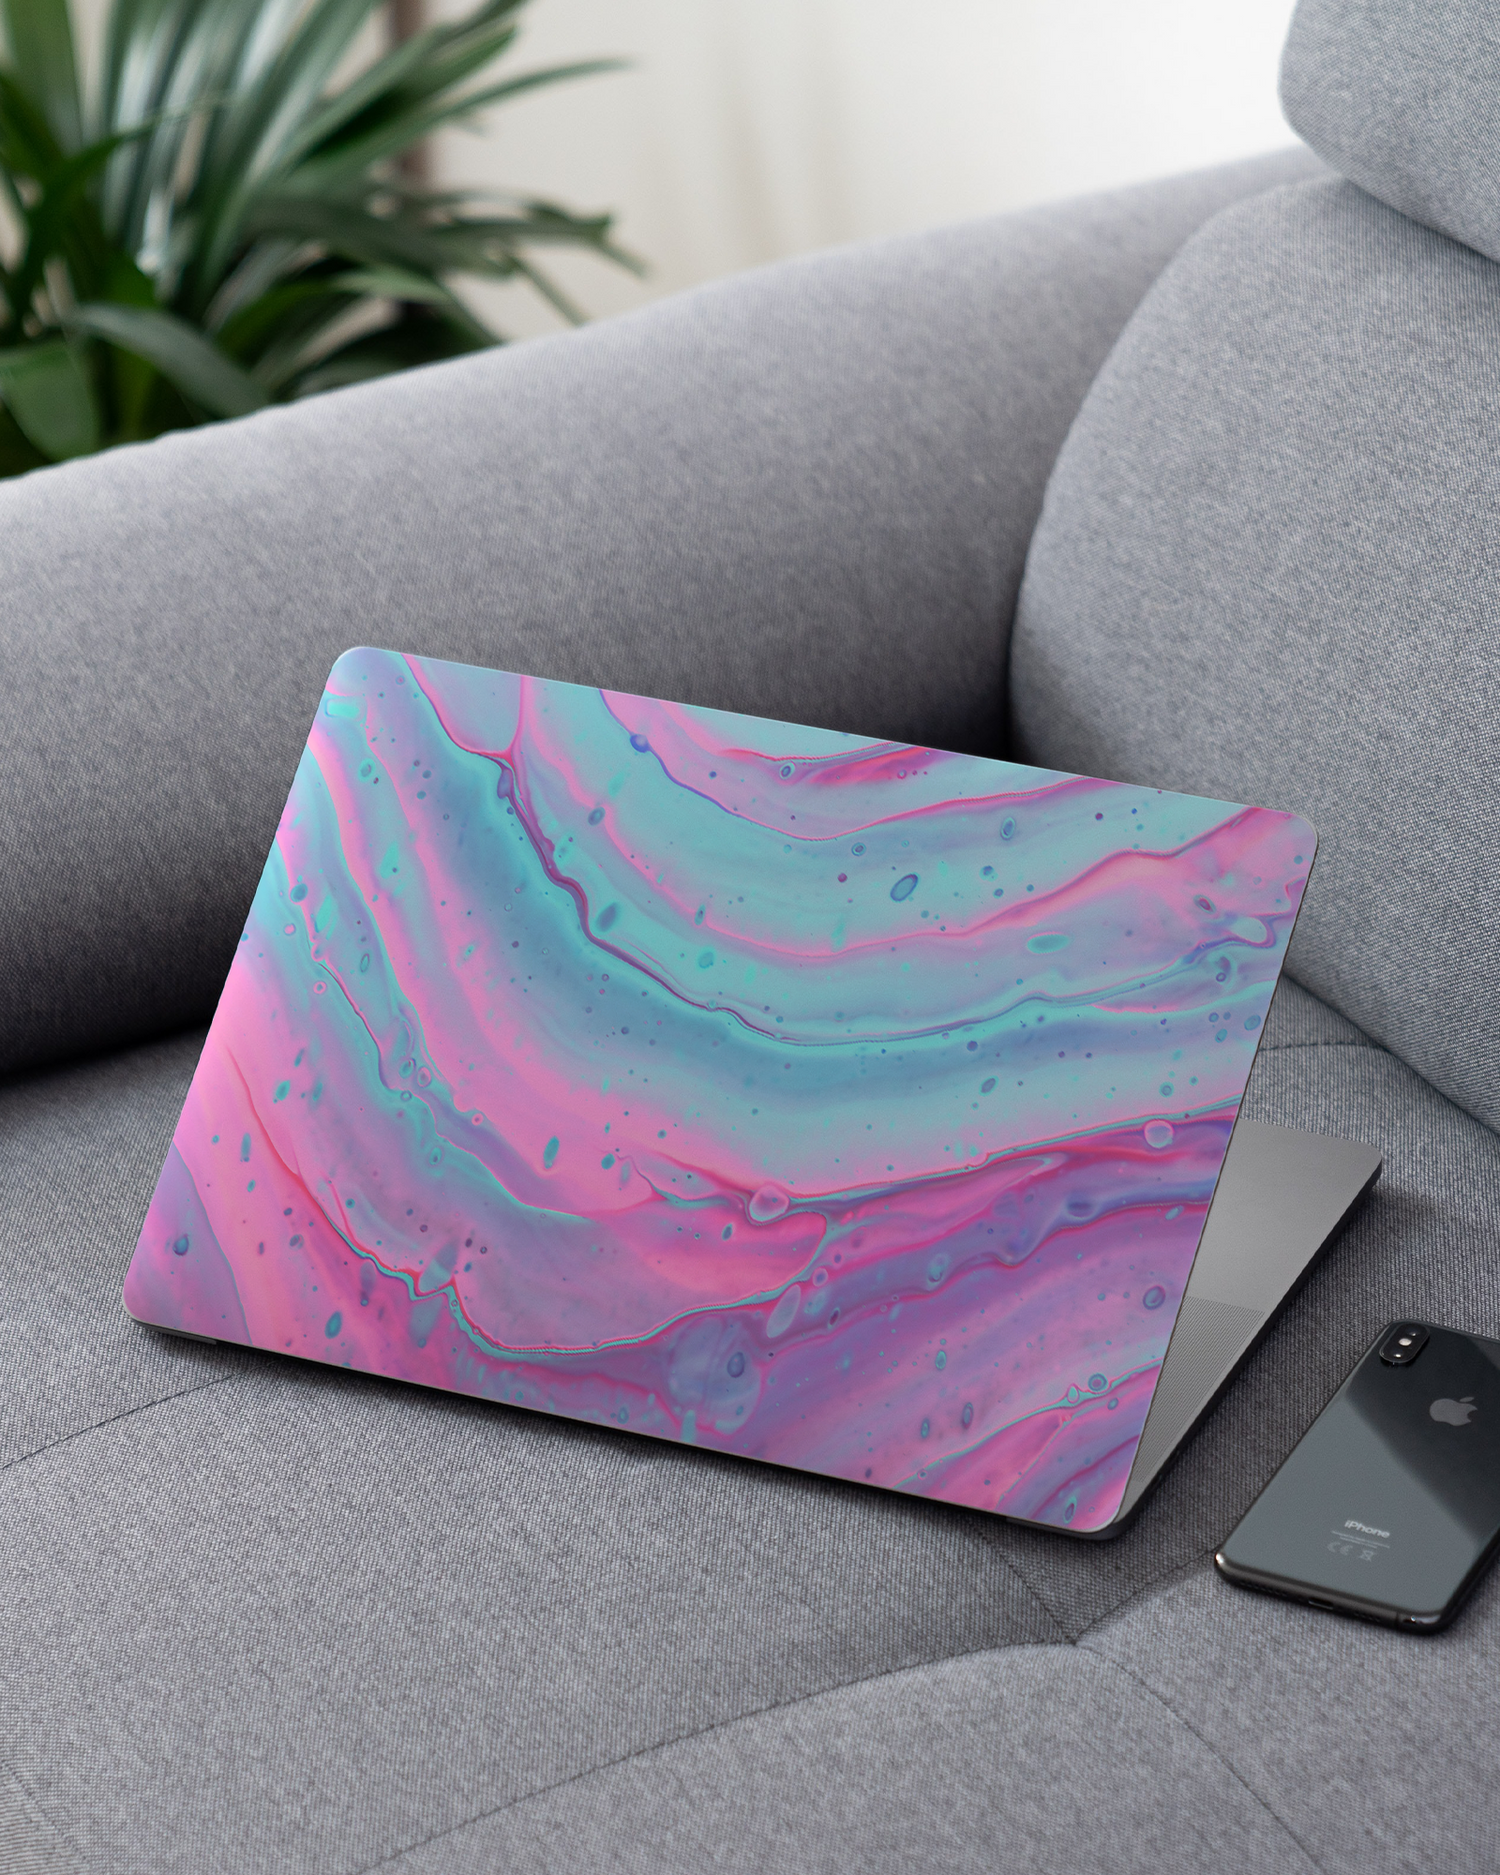 Wavey Laptop Skin for 13 inch Apple MacBooks on a couch